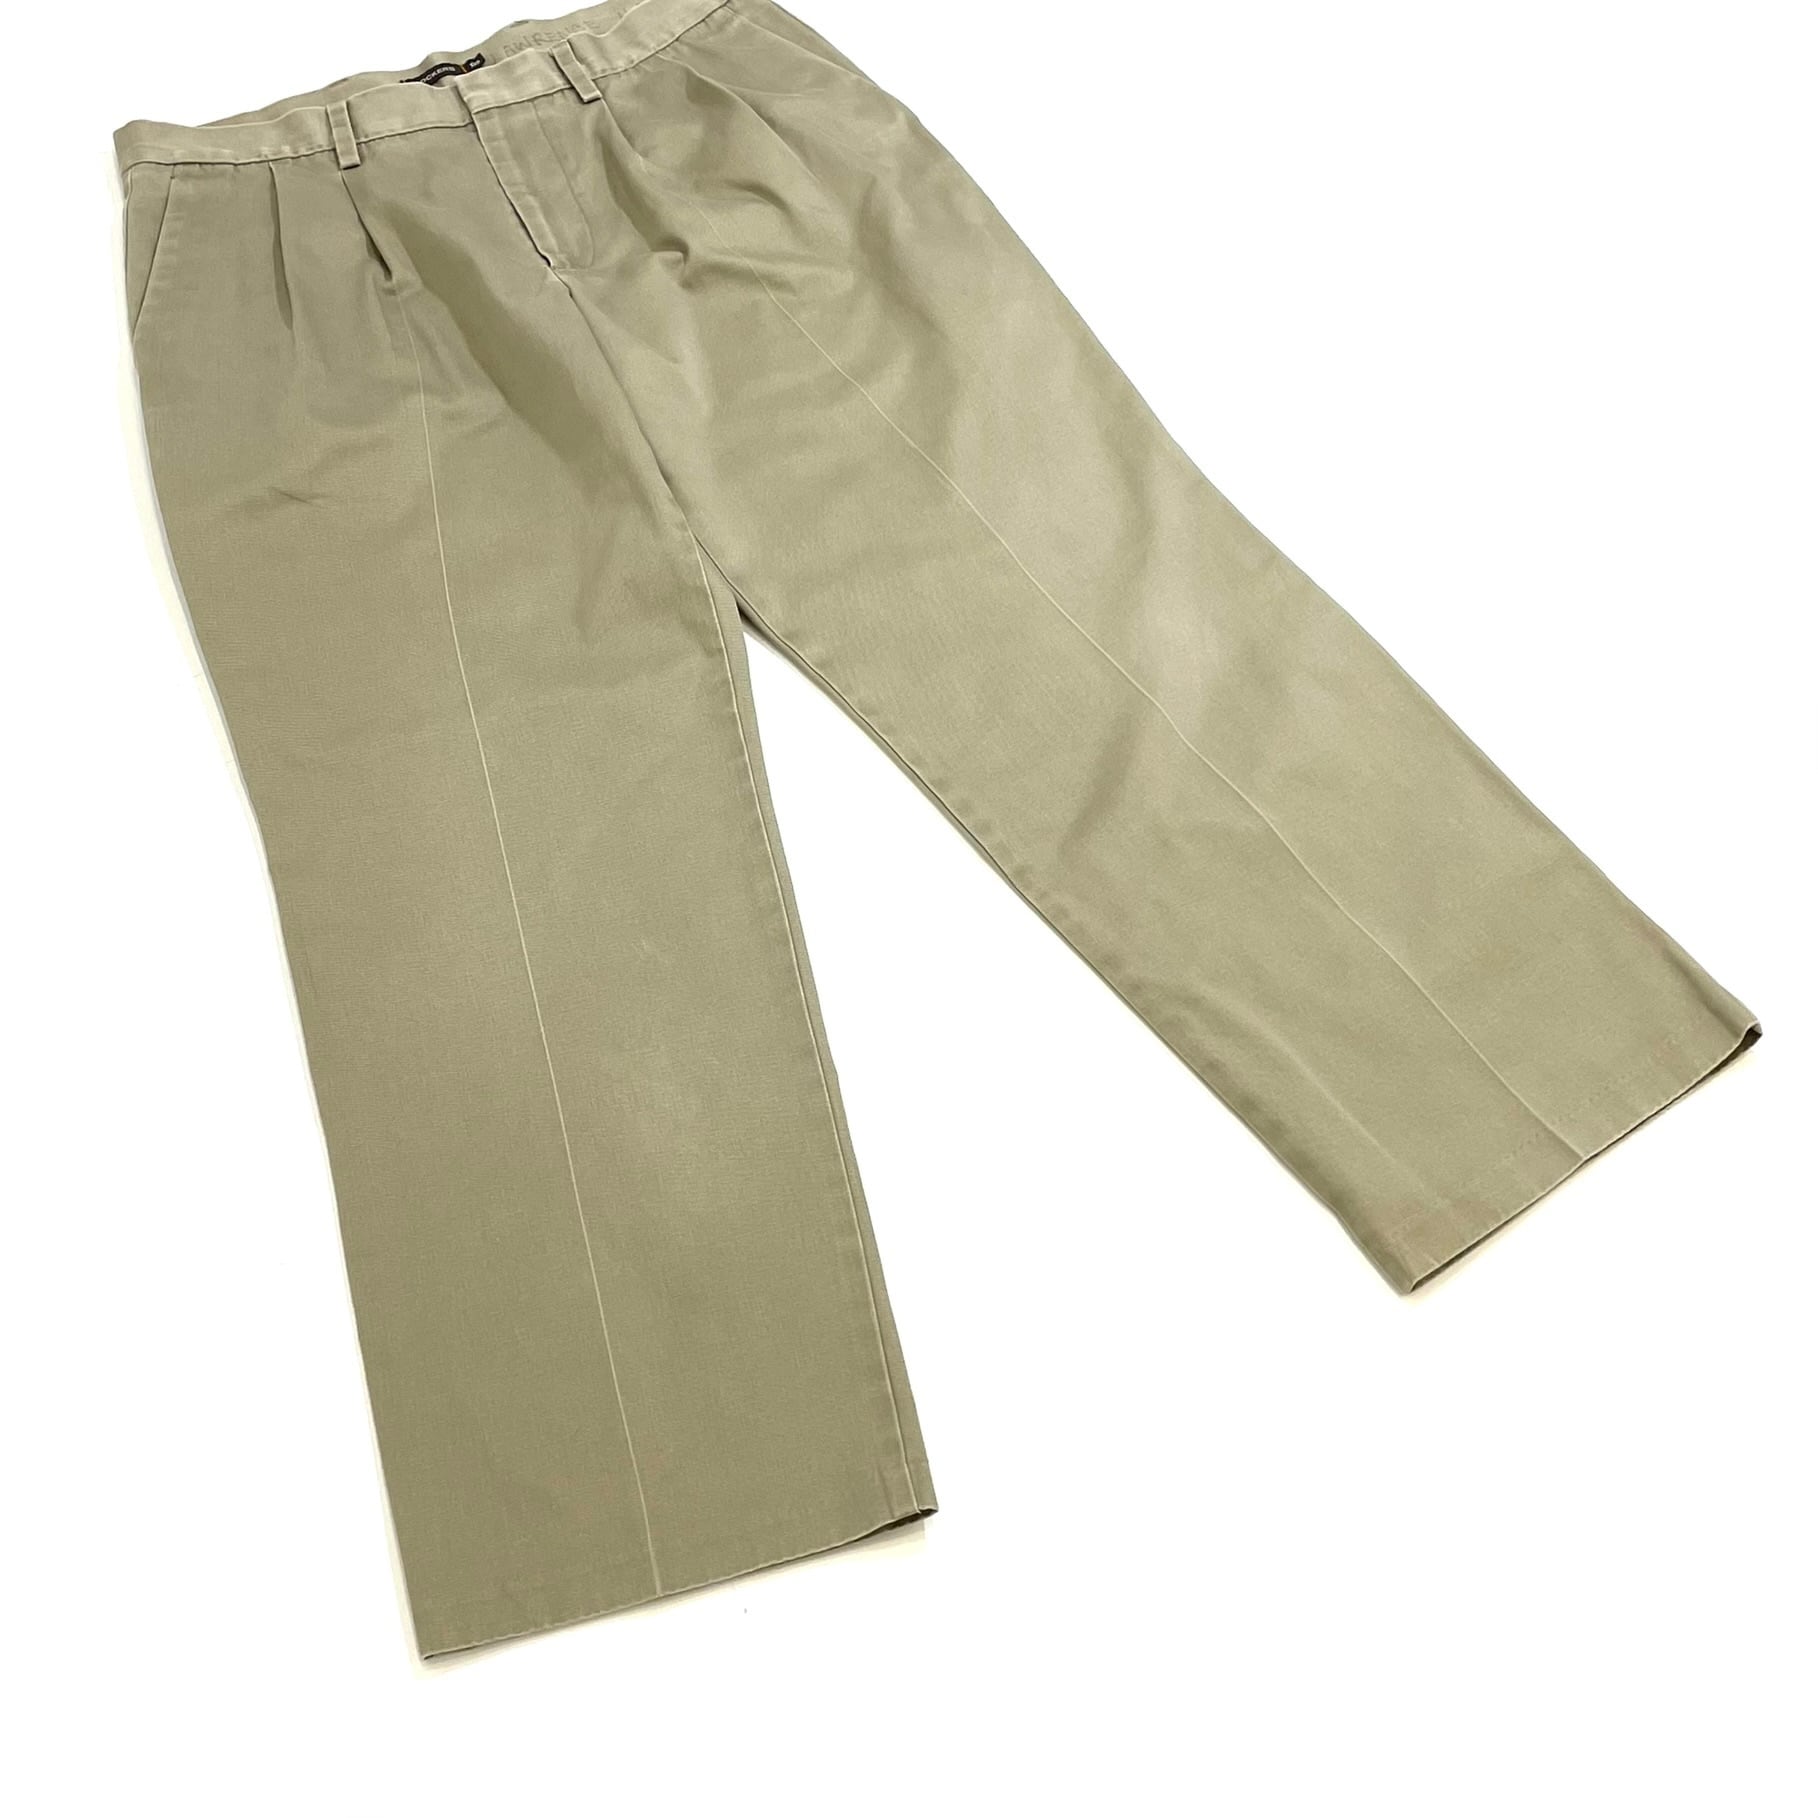 USED 00’s Dockers, 2 tuck chino pants (34x30) - beige | REVERSE STORE  powered by BASE